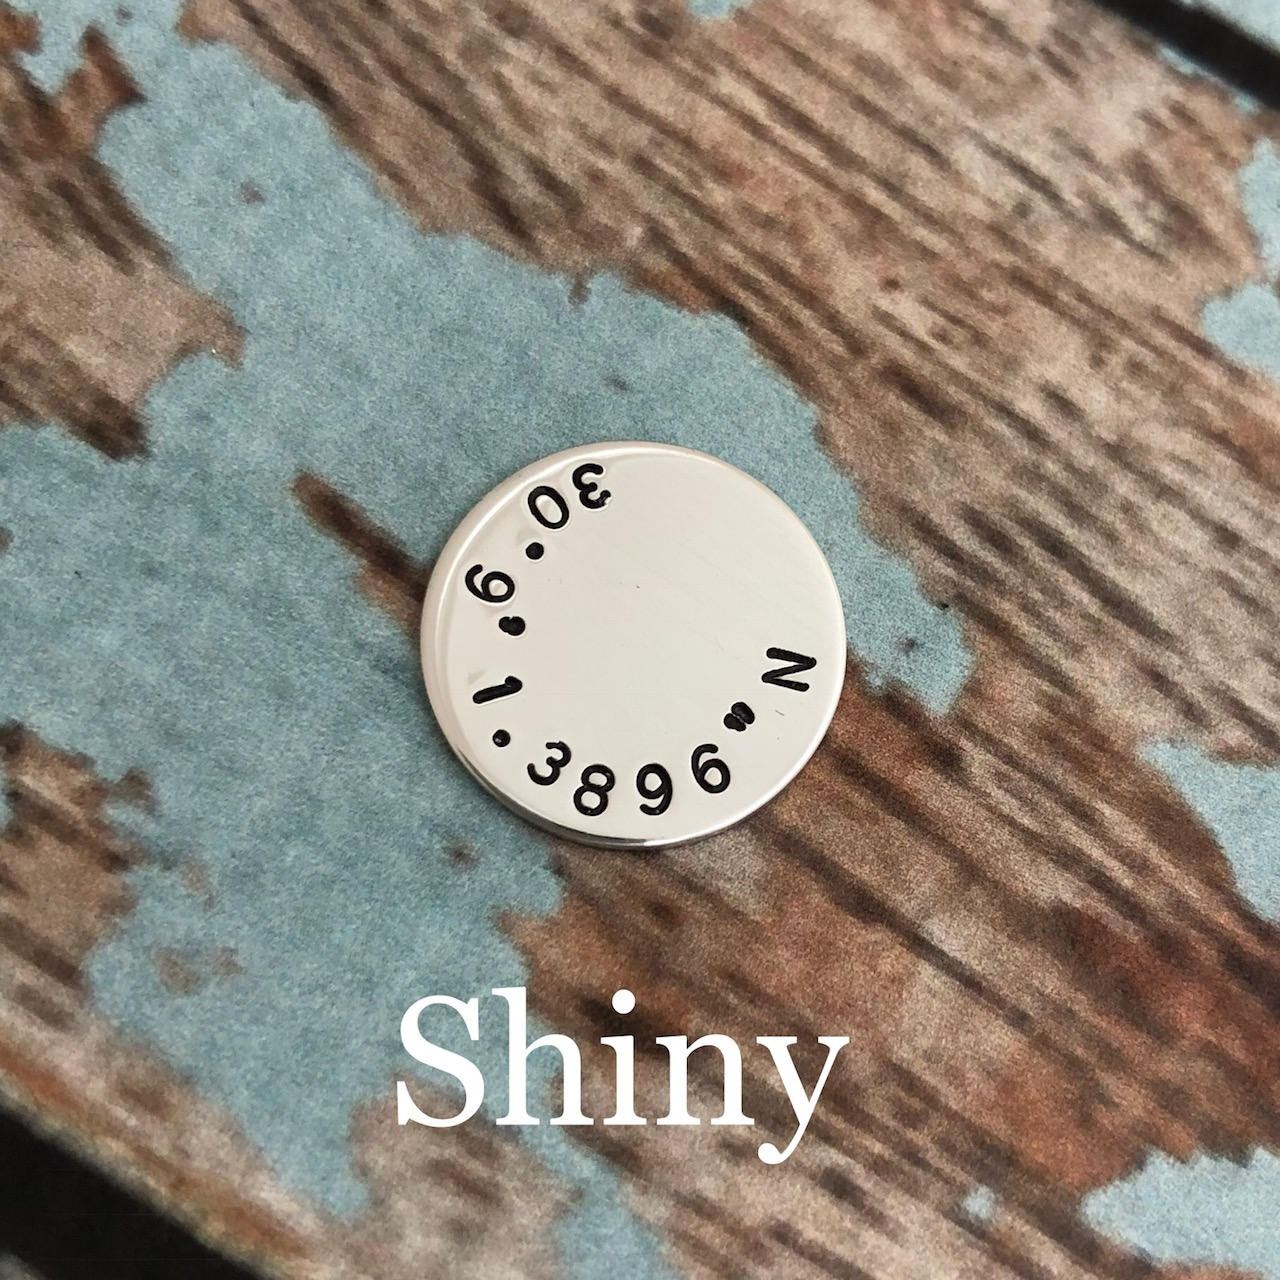 Personalized Men's Cuff Links, Coordinate Cuff Links, Latitude and Longitude Cuff Links, Sterling Silver, Gifts for Him, Hand Stamped